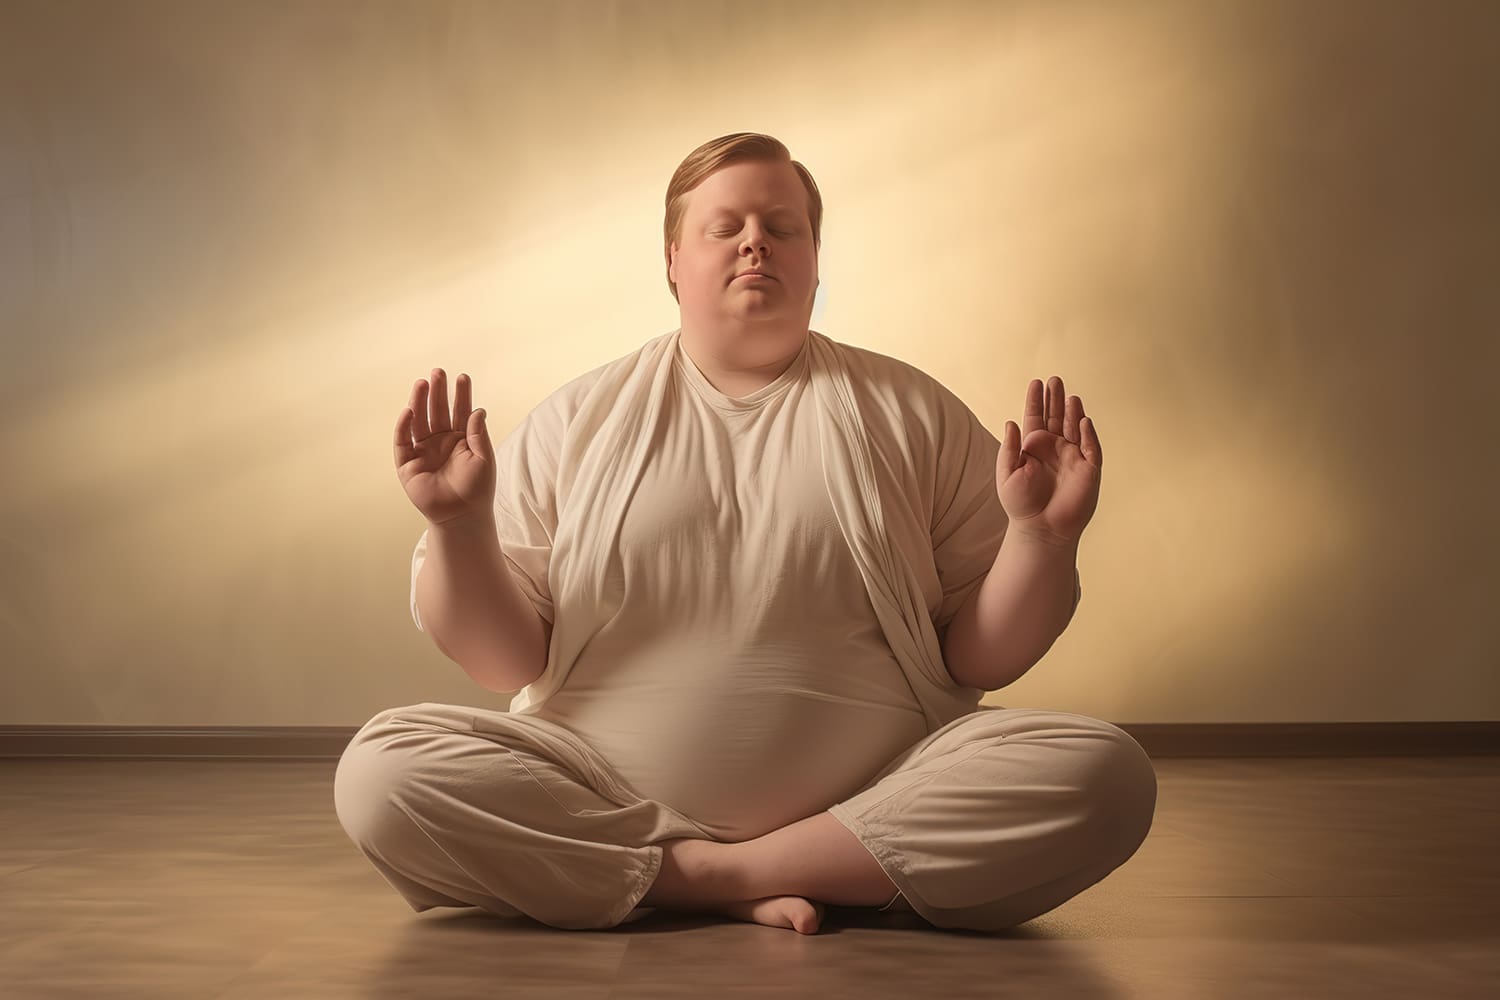 A person sits cross-legged on the floor, meditating with eyes closed and hands raised in a serene, graceful pose. The individual is dressed in cream-colored, loose-fitting attire. The background is softly illuminated with a warm, golden light, as though reprogramming your mind for a healthier you.